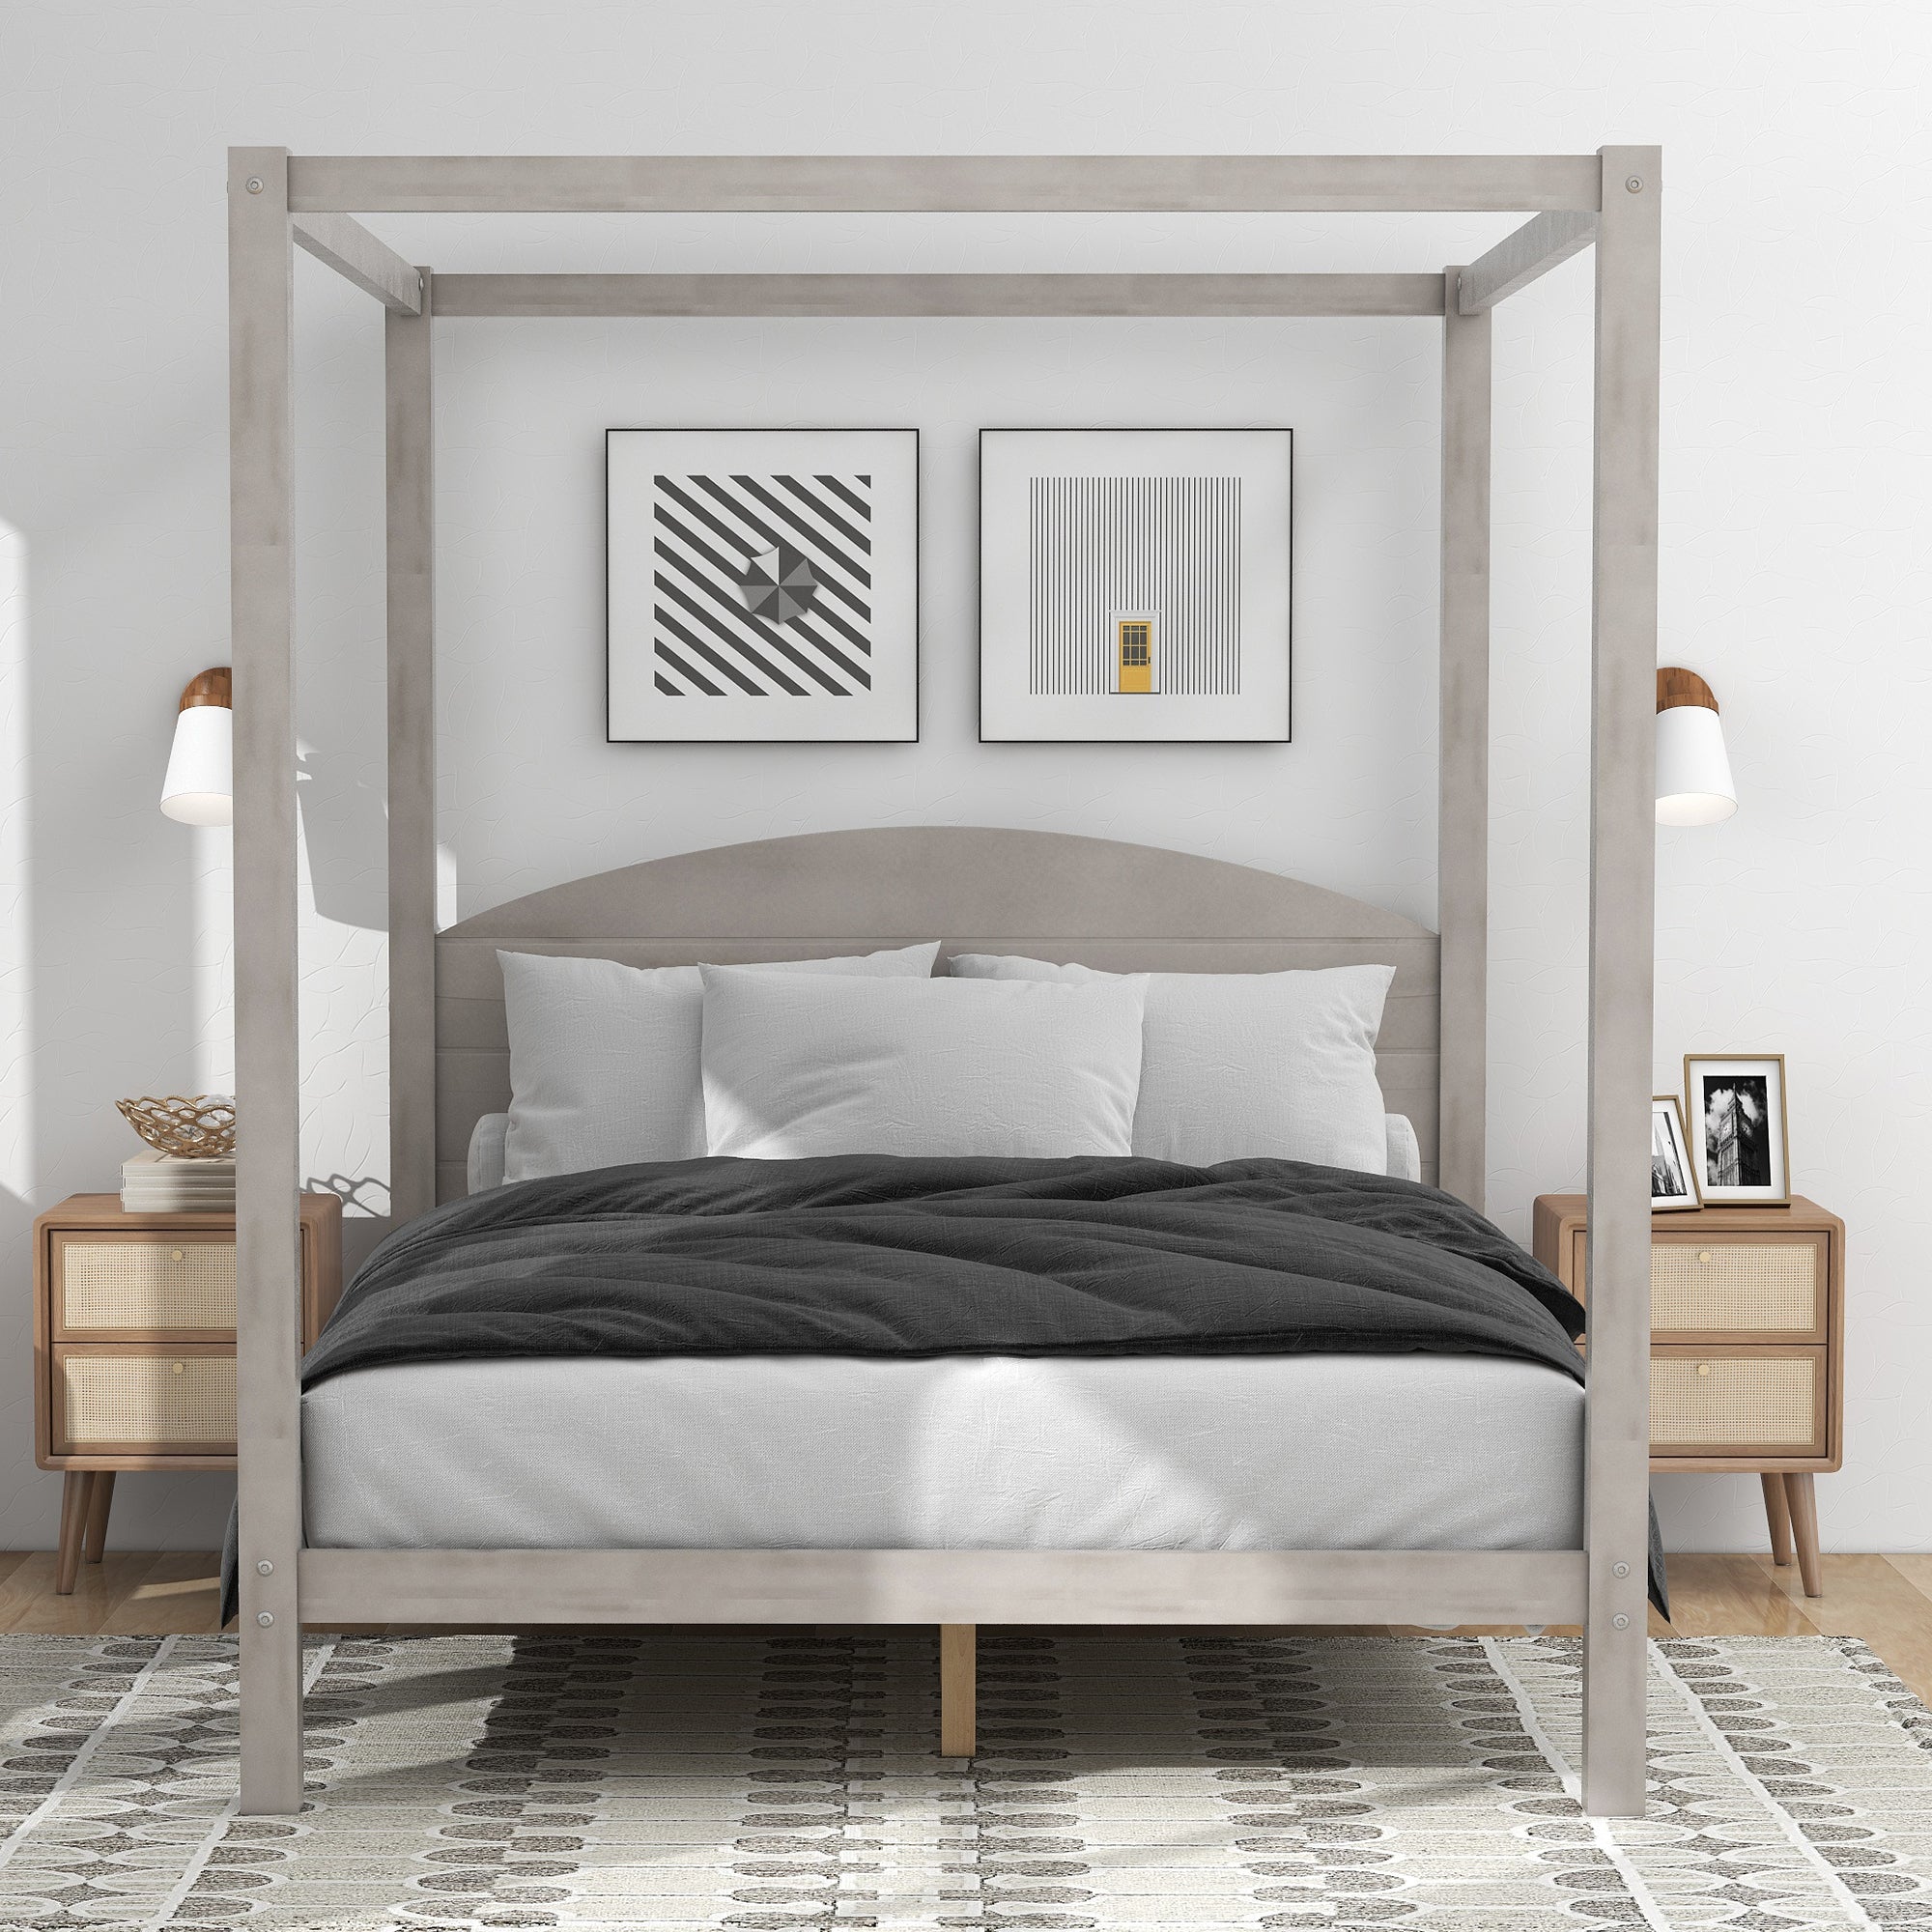 Queen Size Canopy Platform Bed with Headboard and Support Legs - Grey Wash